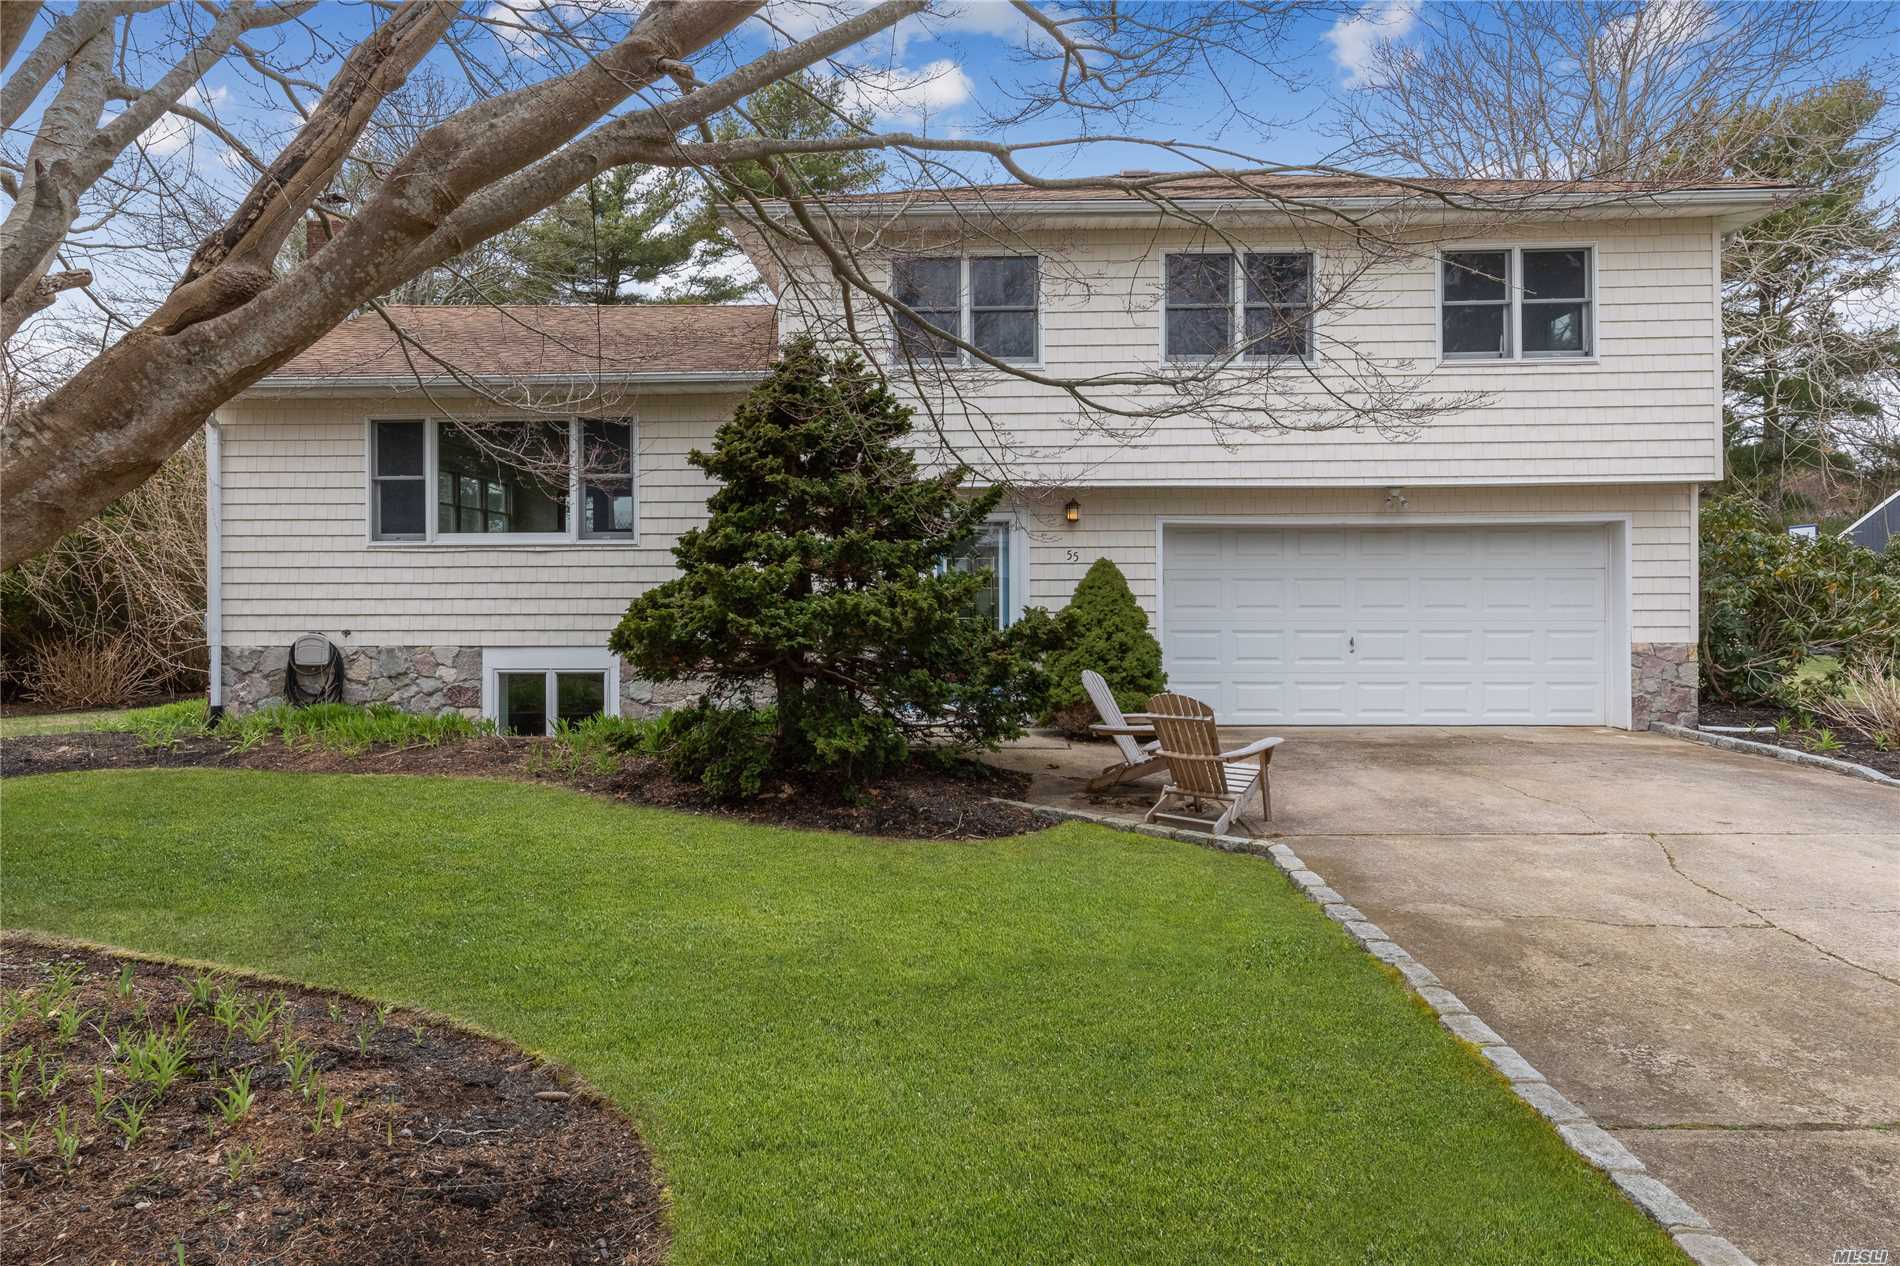 Located In A Quiet, Desirable Southold Neighborhood, This 4 Bedroom, 2.5 Bath Home Offers Spacious Open Layout, Many Updates, Including Hardwood Floors, Possible Mother-Daughter Apartment With Separate Entrance & Beautifully Landscaped Yard. 2 Car Garage.